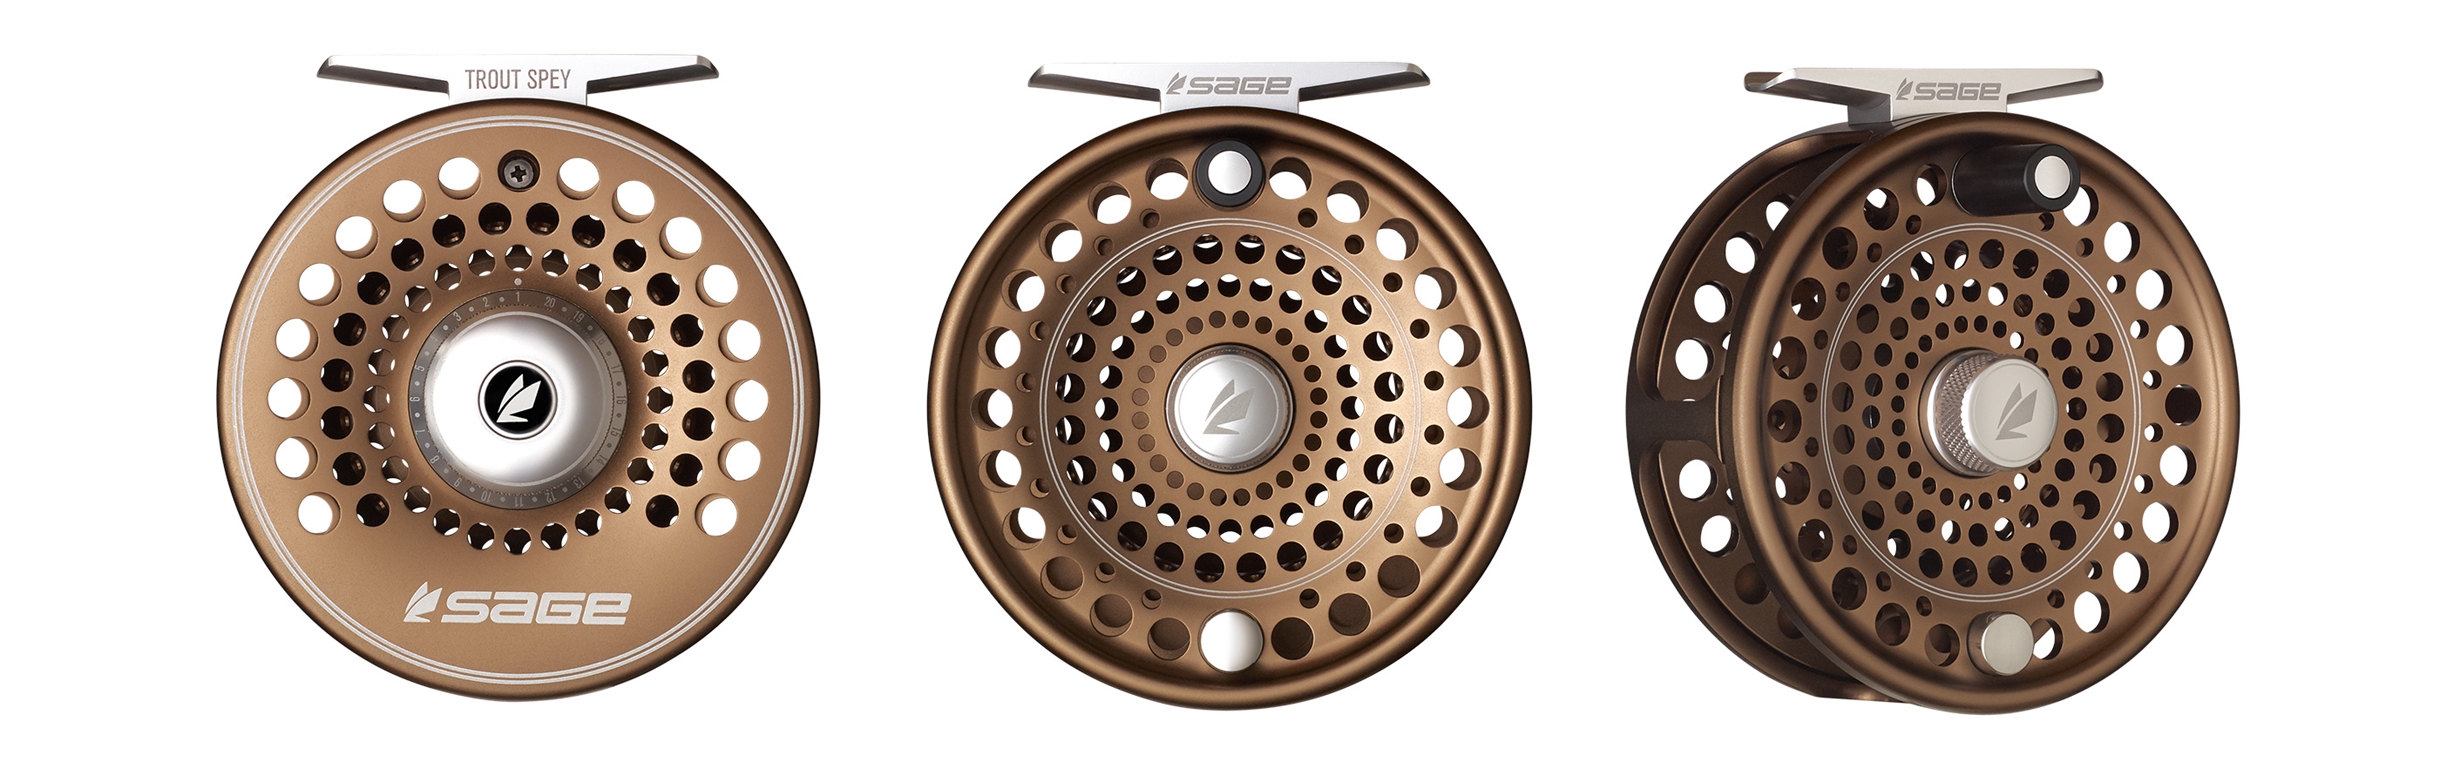 Sage Trout Spey Reel - Headhunters Fly Shop